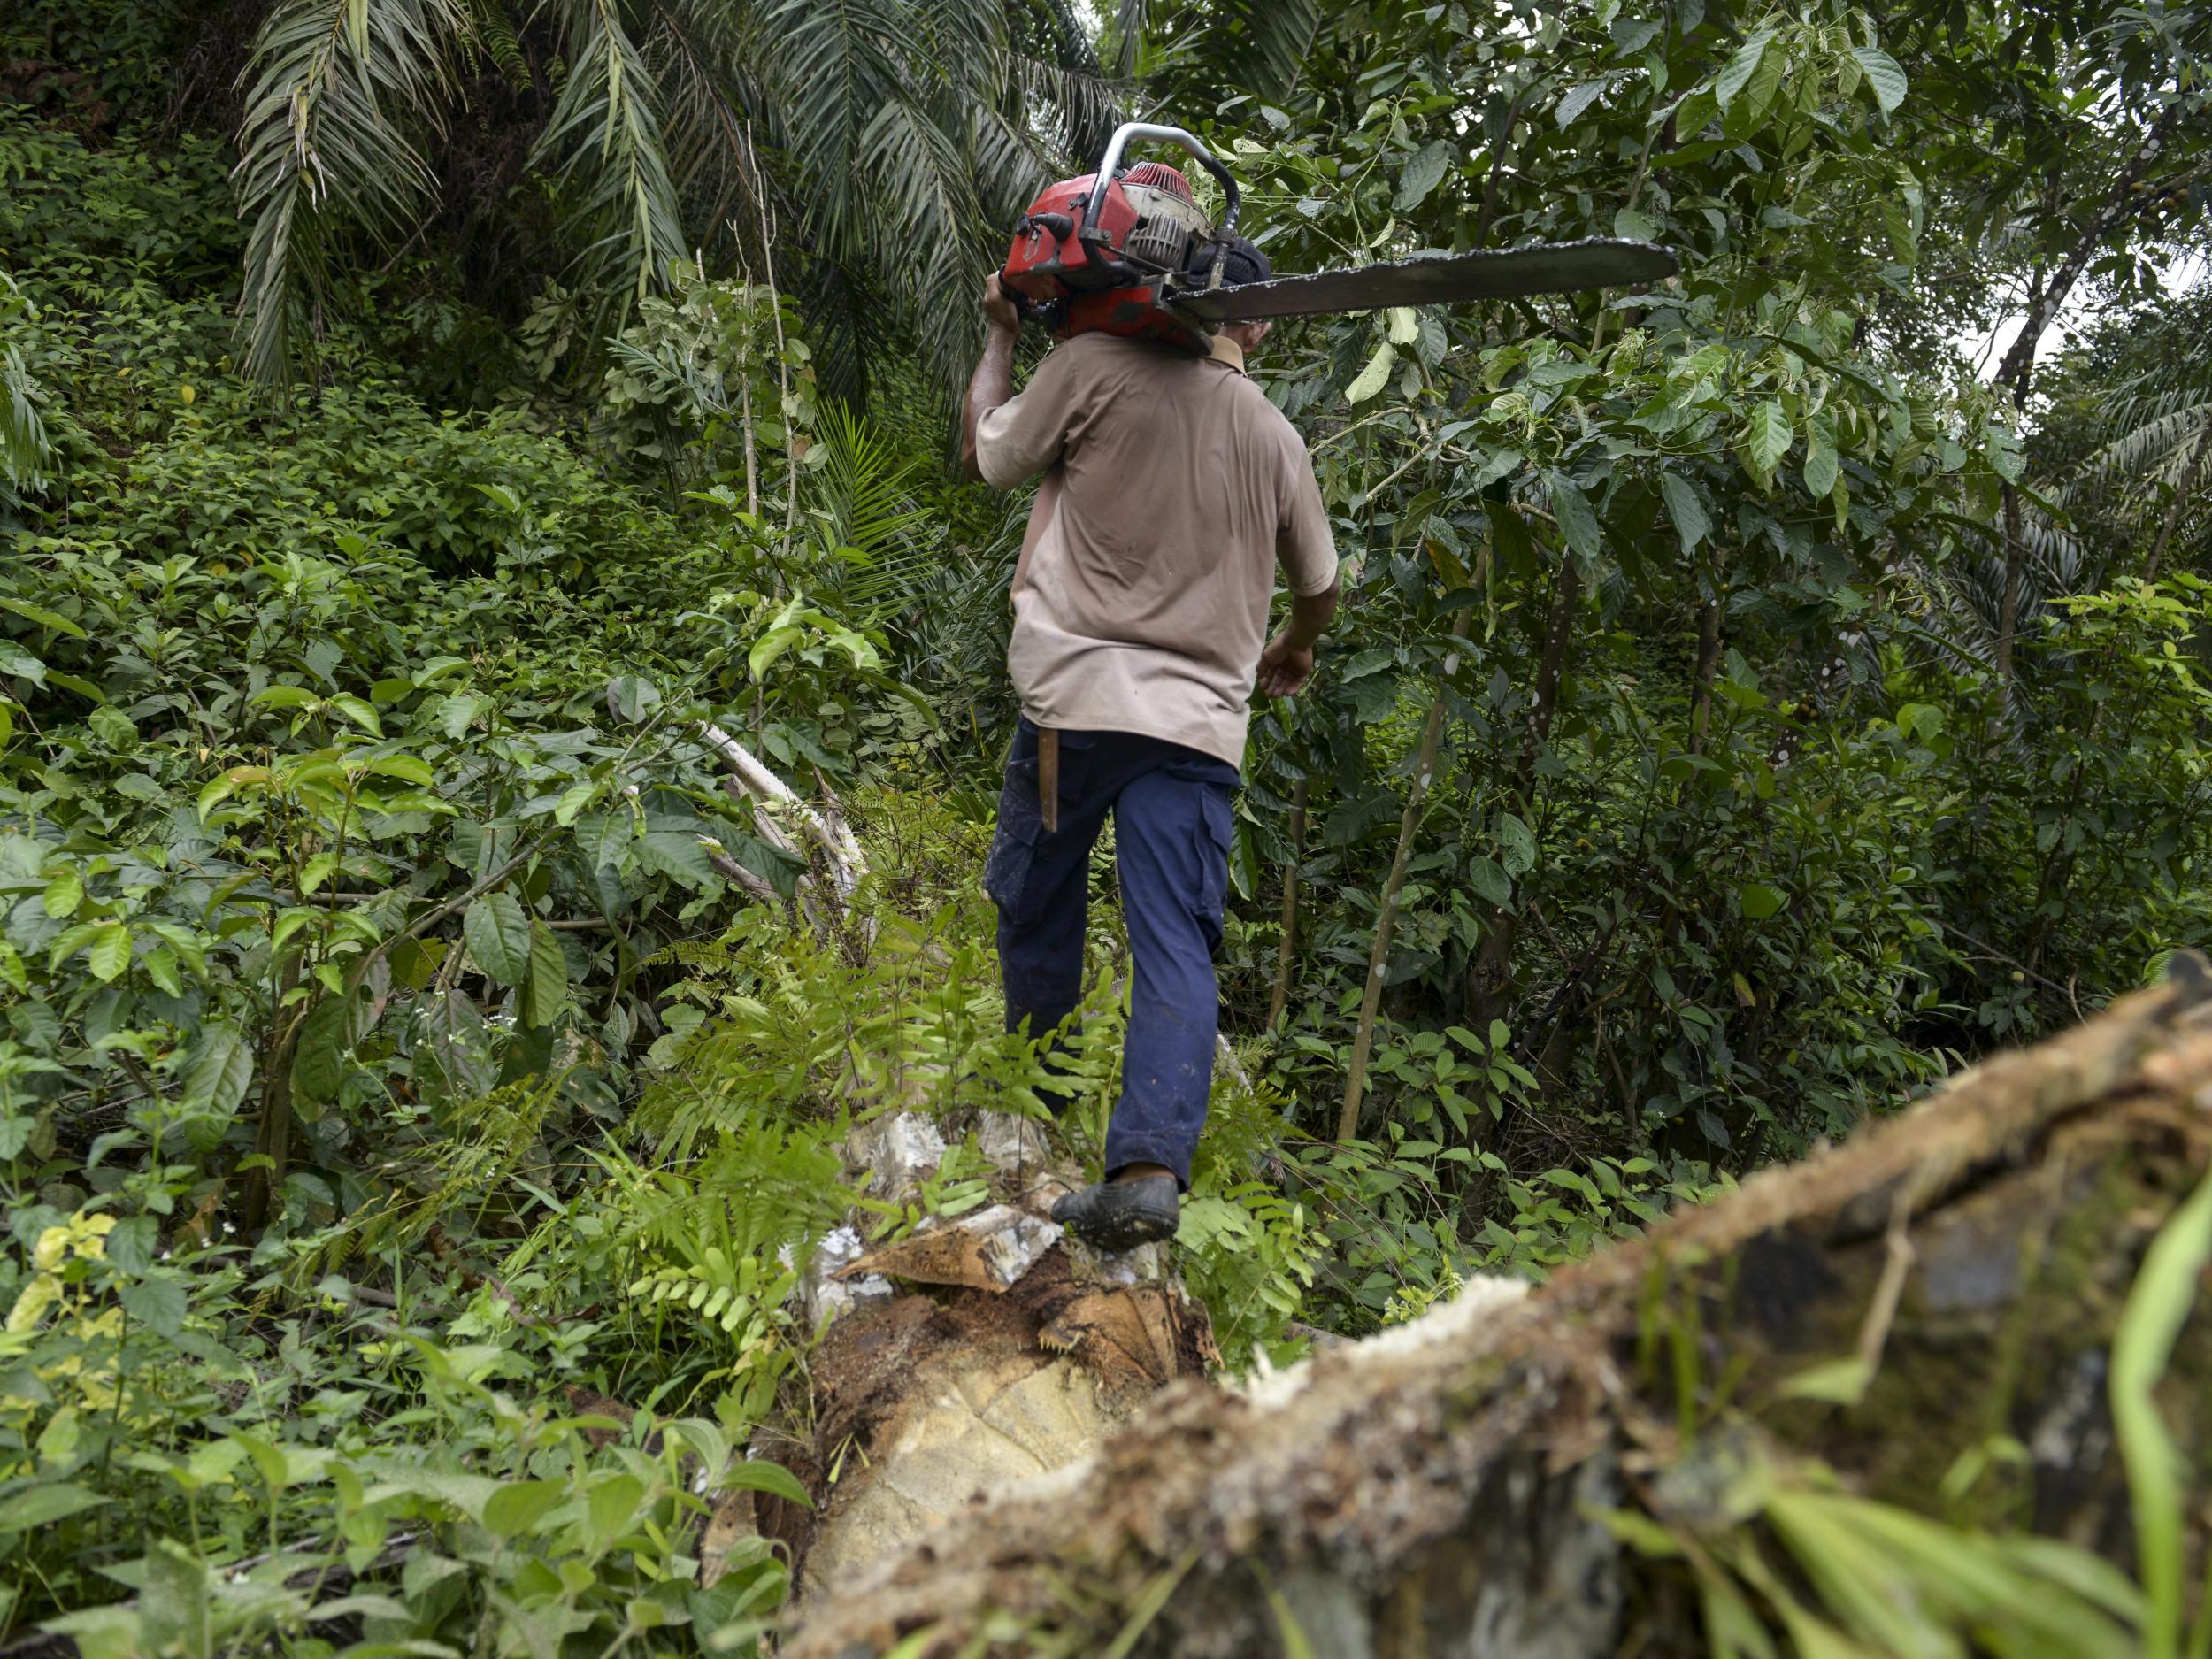 It's a jungle out there: deforestation for food production is a massive problem